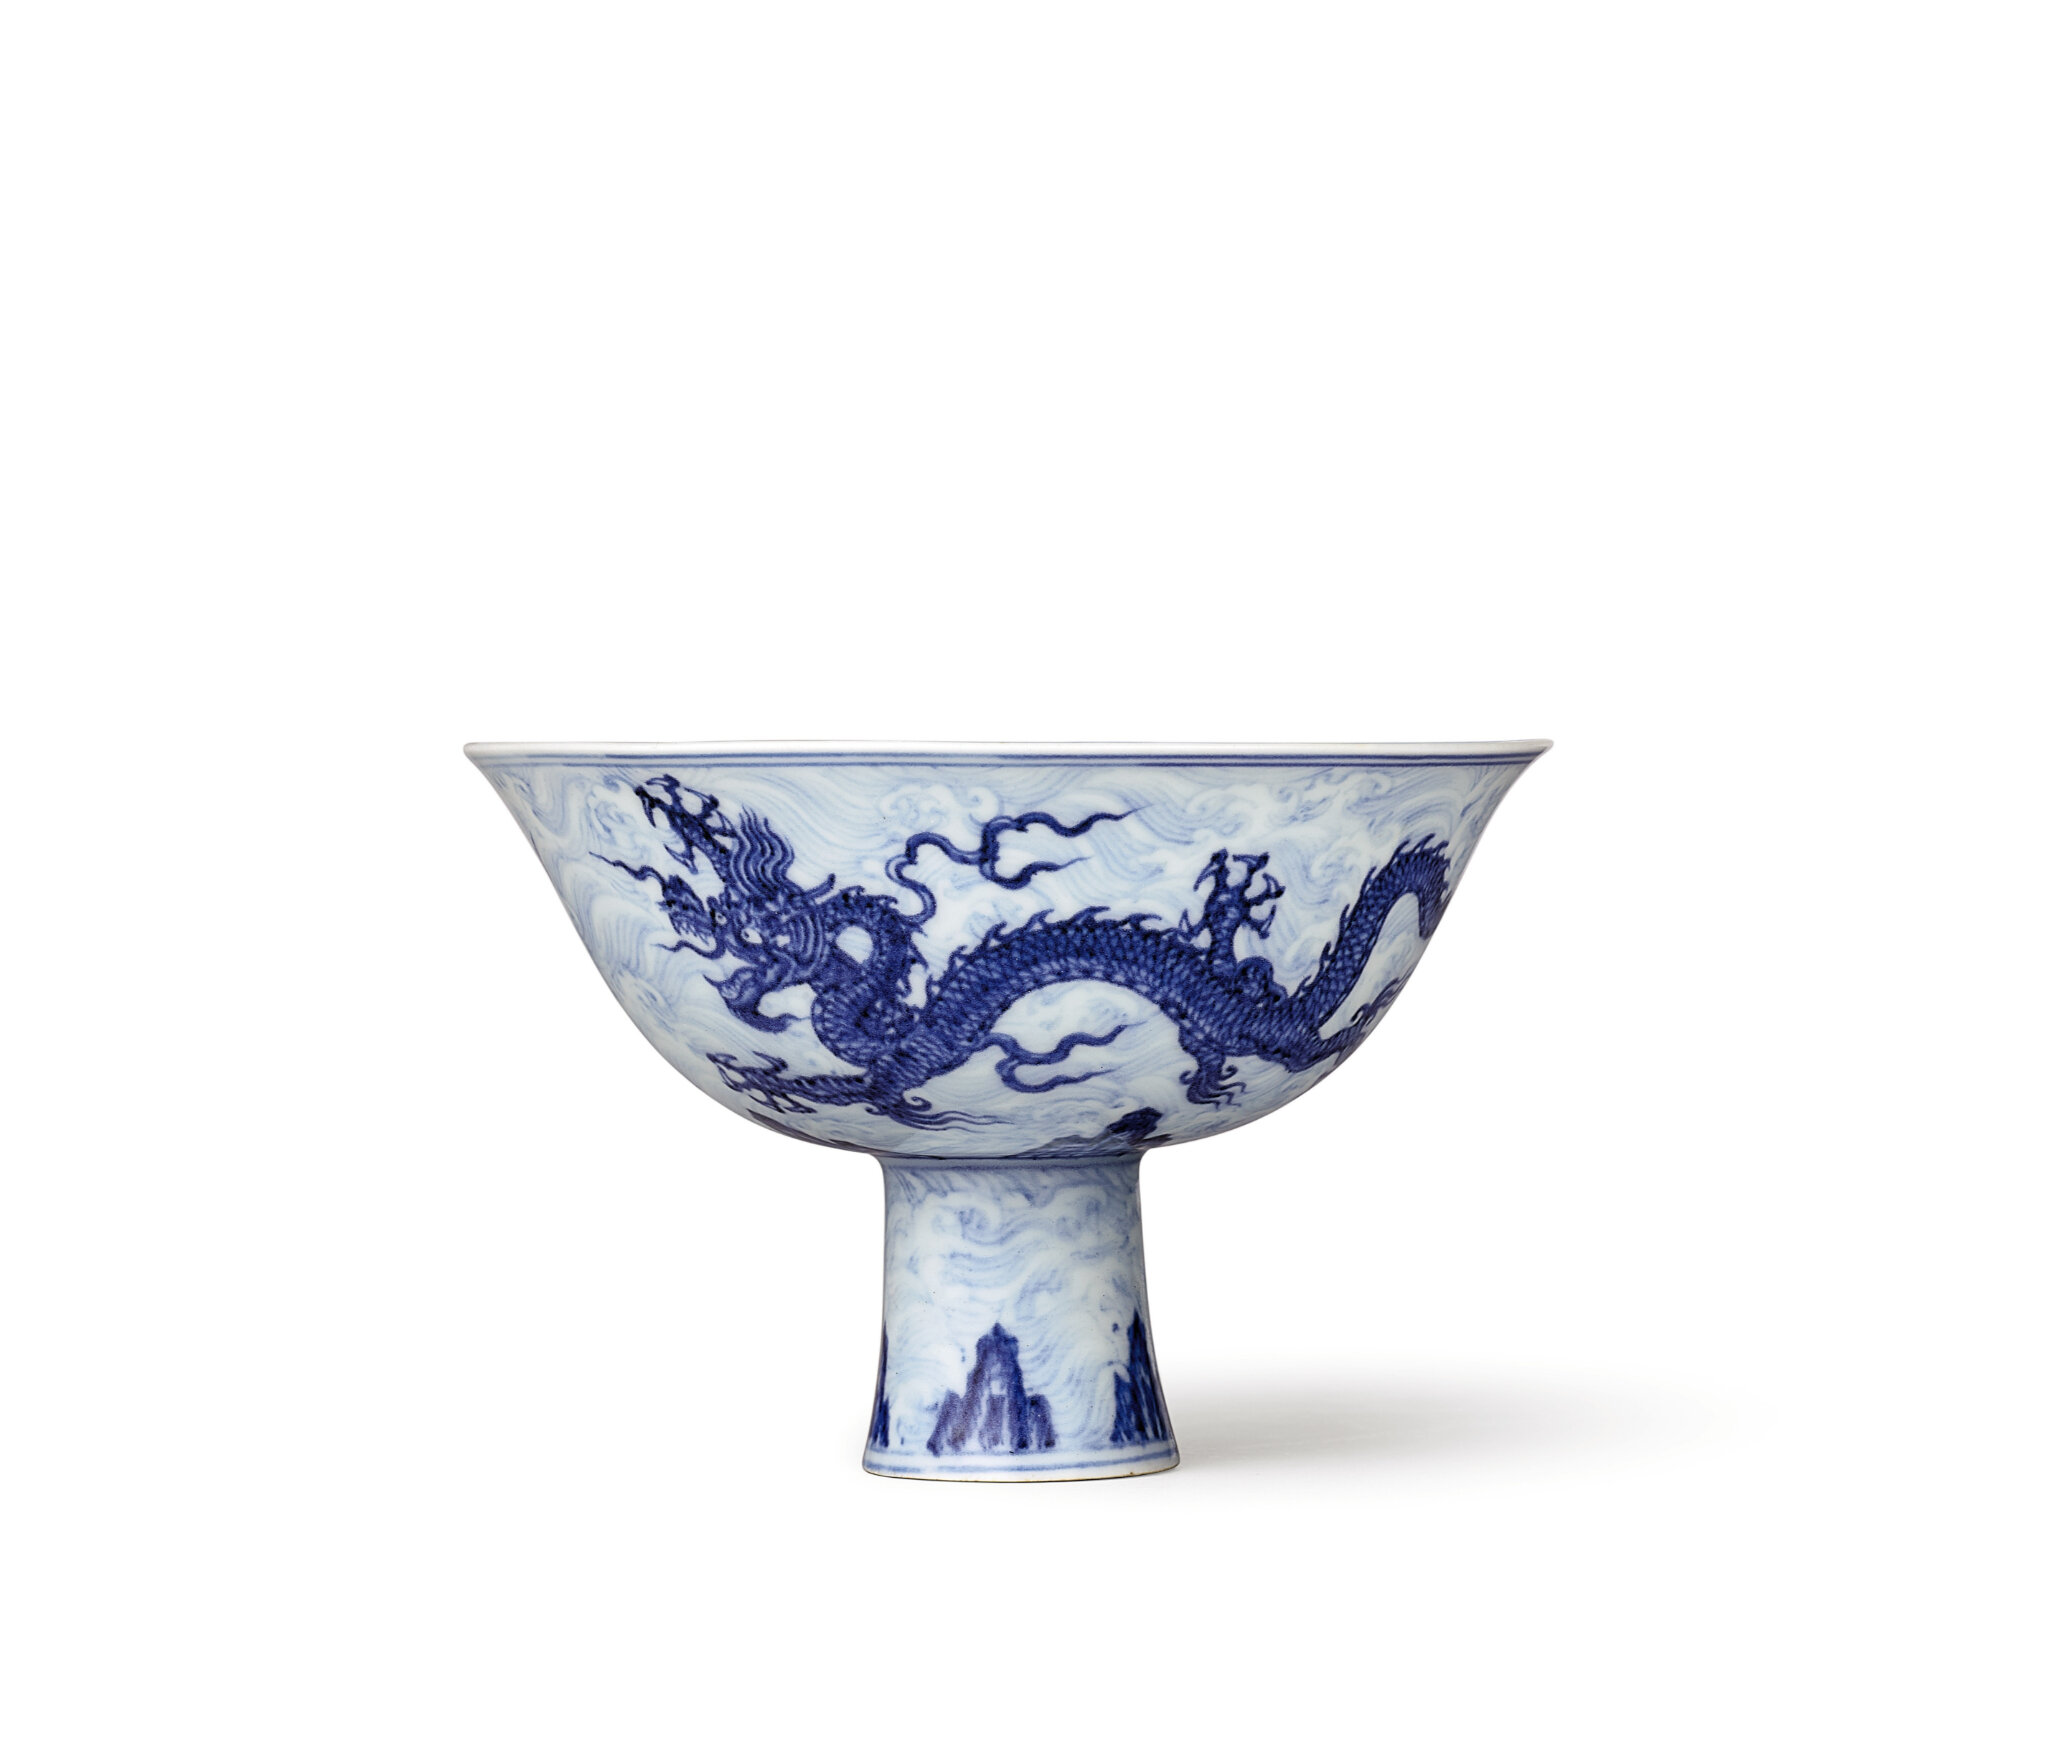 Sotheby's Hong Kong Chinese Works of Art Autumn Sales 2019 to take